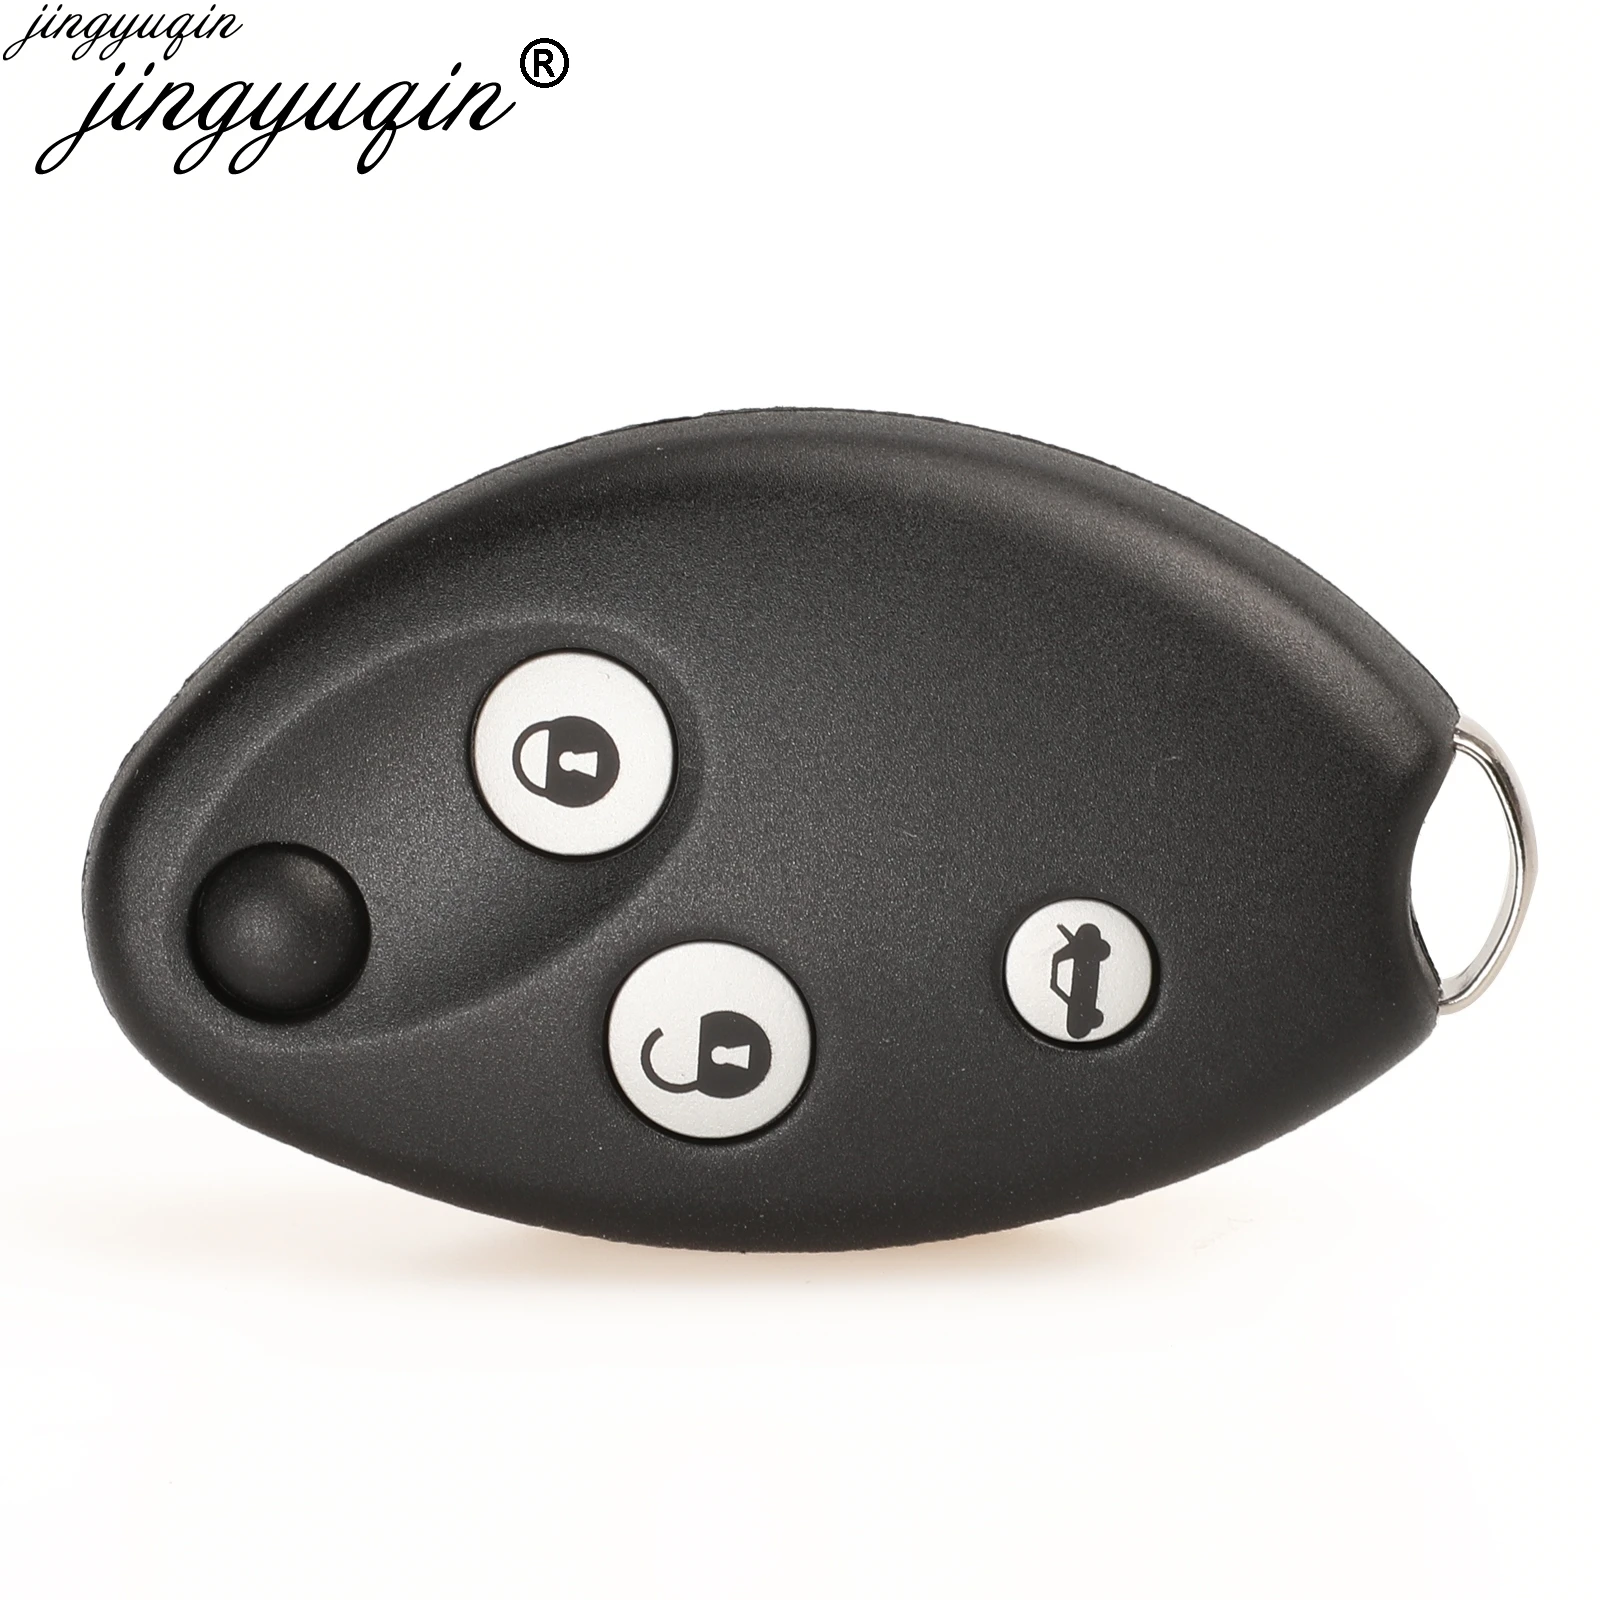 Jingyuqin Replacement For Citroen Xsara C4 C5 Auto Key Case Cover 3 Buttons Remote Flip Key Fob Shell